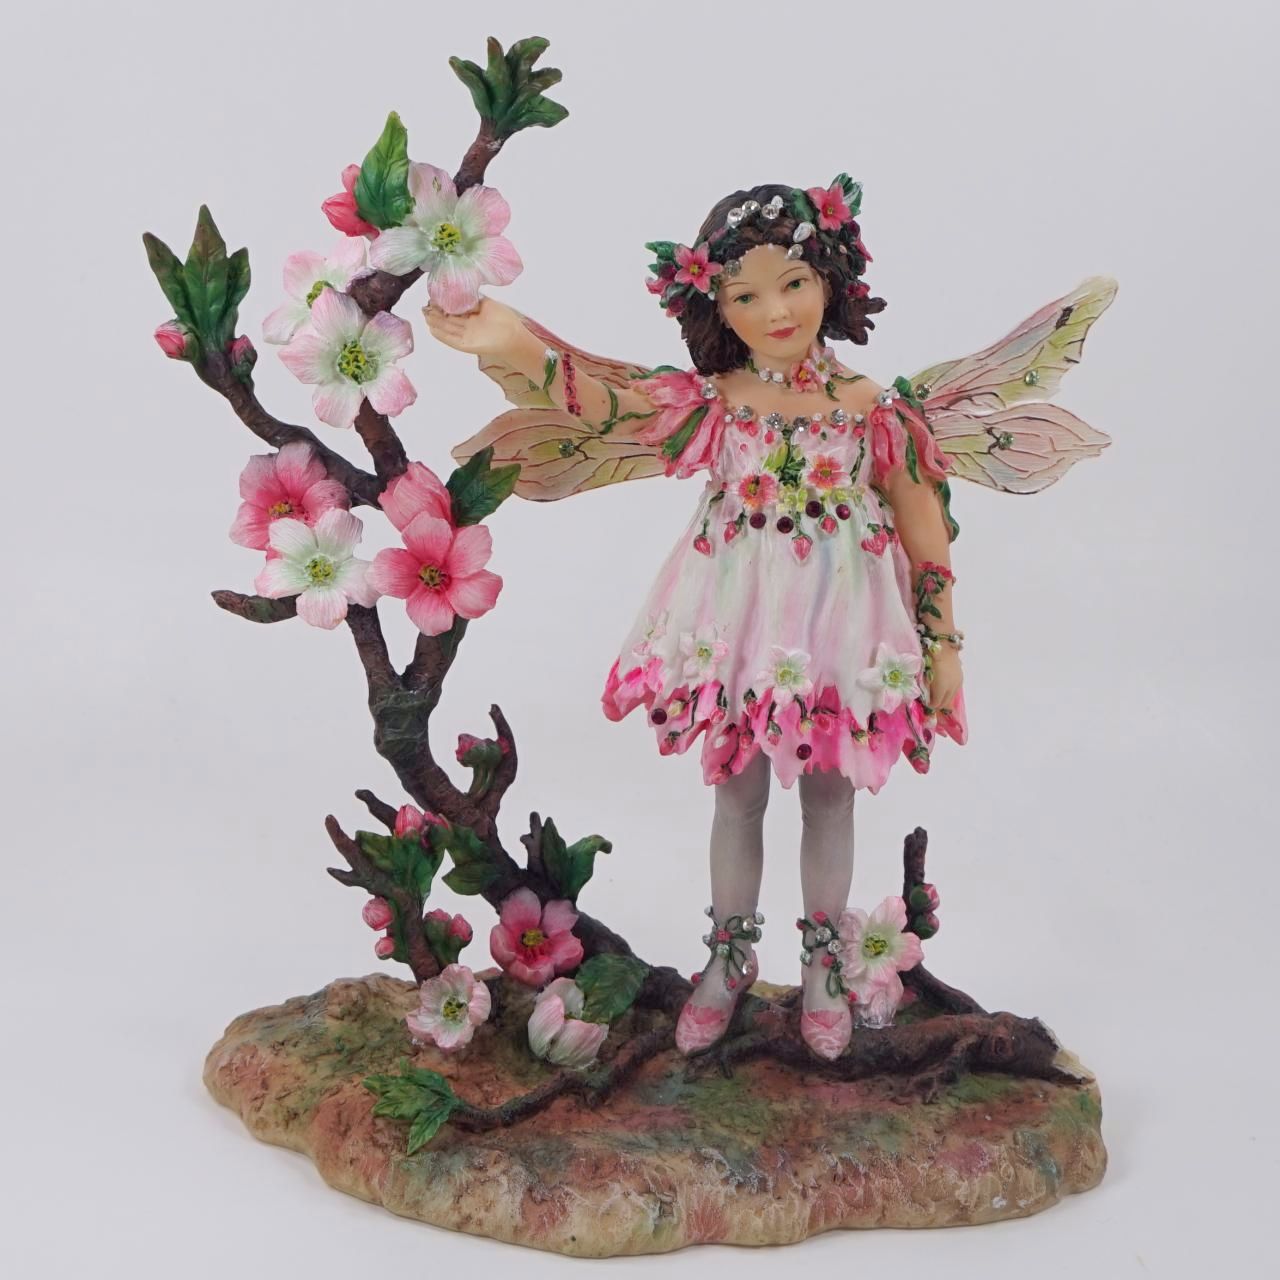 Crisalis Collection★ Cherry Blossom Faerie (1-37) 10% OFF